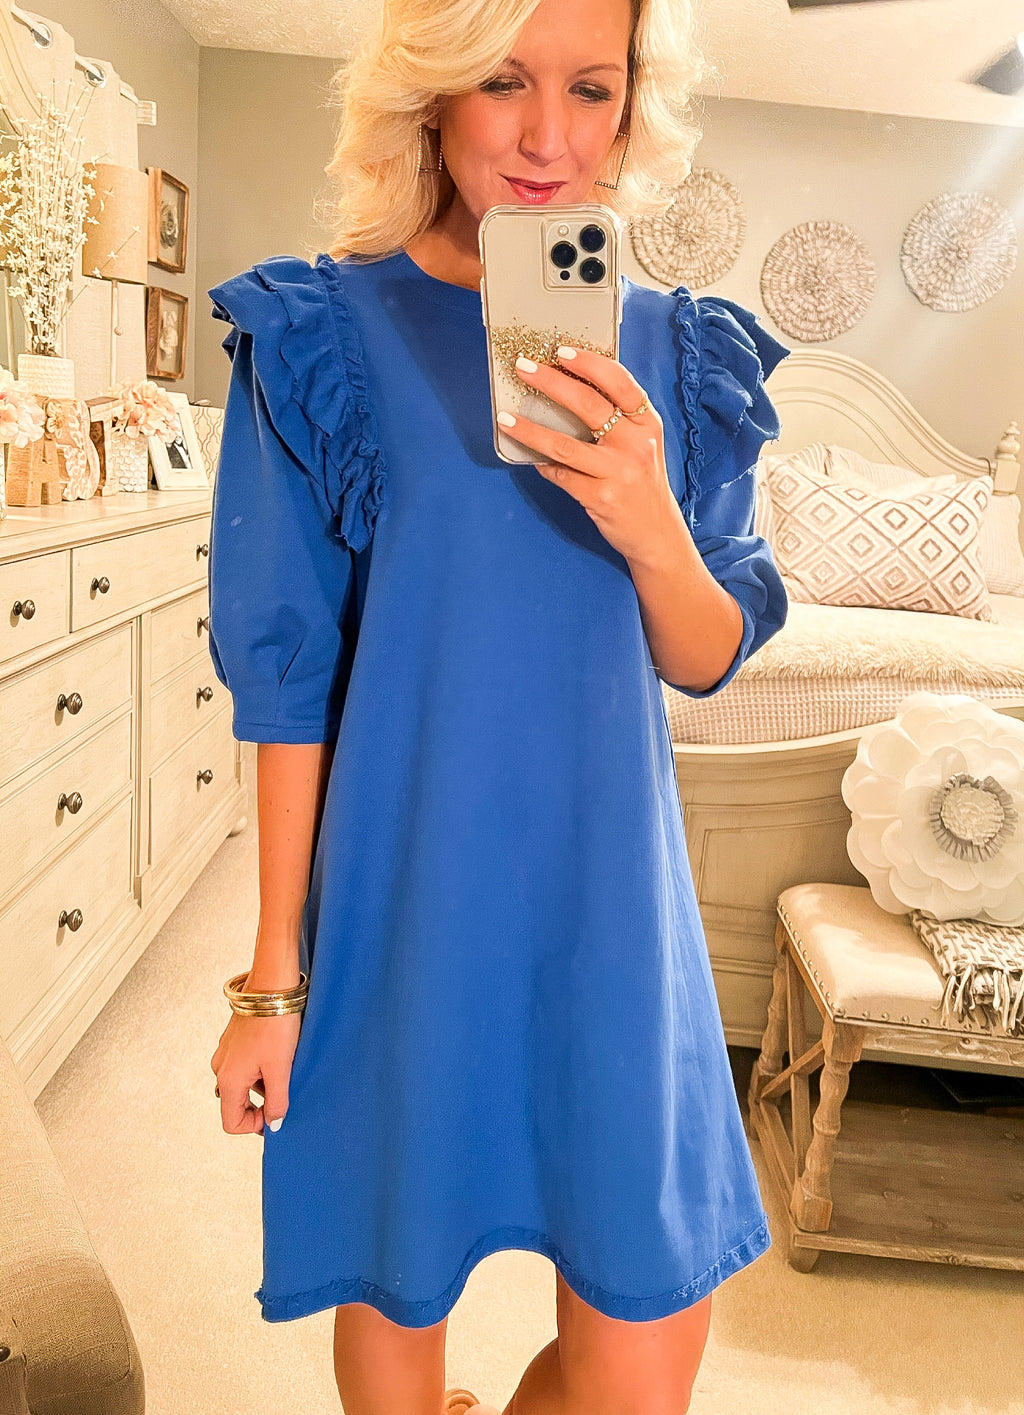 Royal Blue French Terry Dress with Ruffle Detail